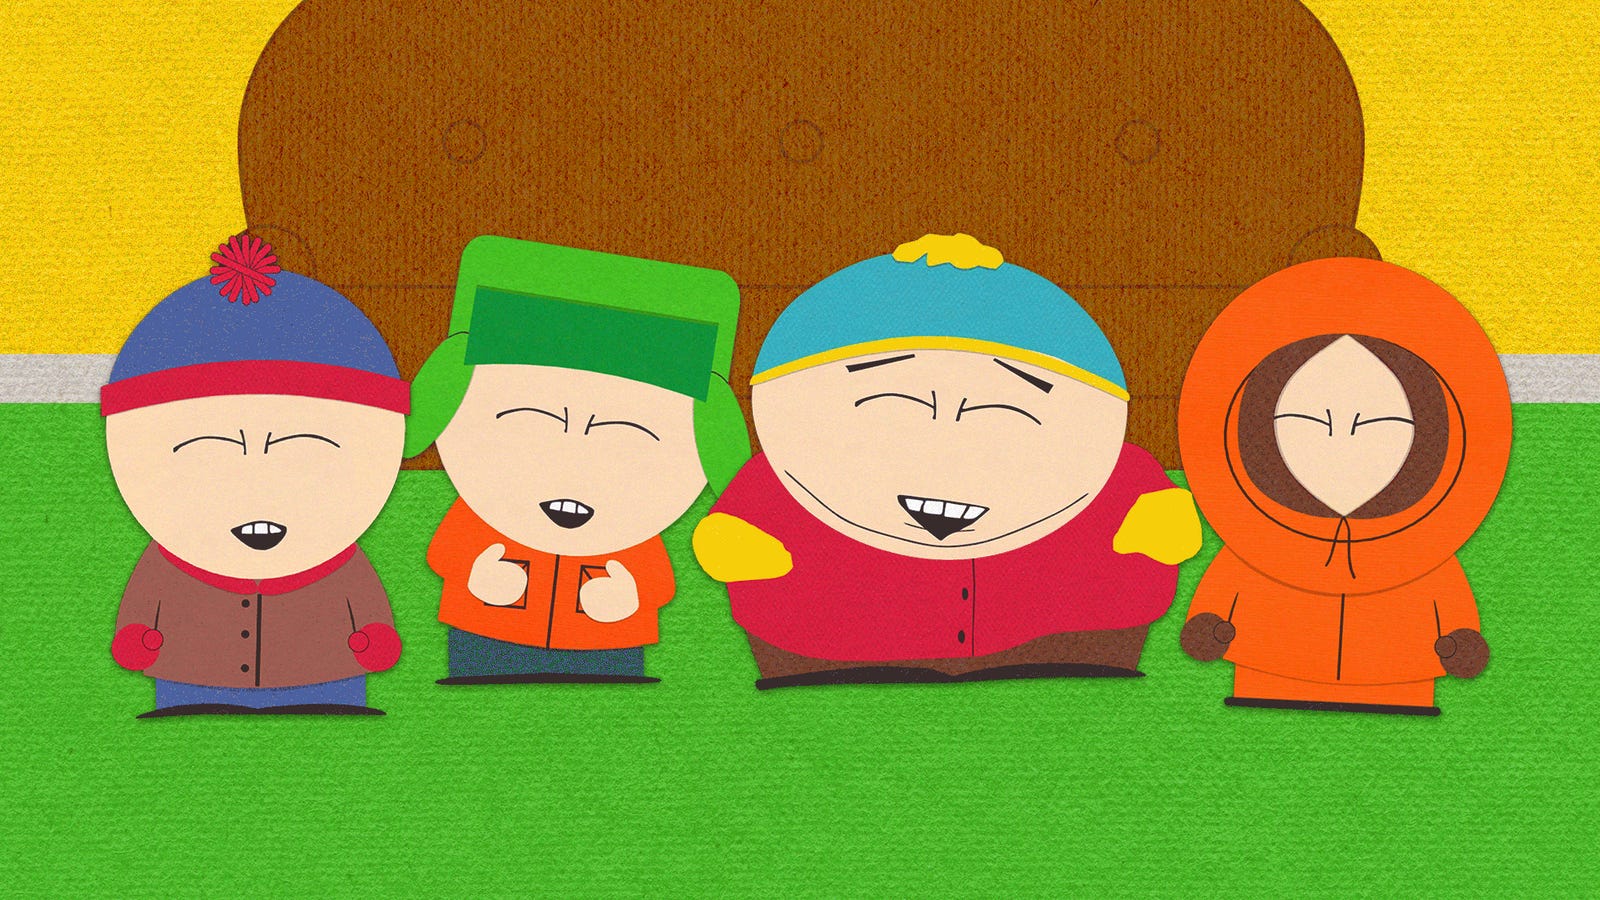 South Park revitalized its relevance by revisiting its roots